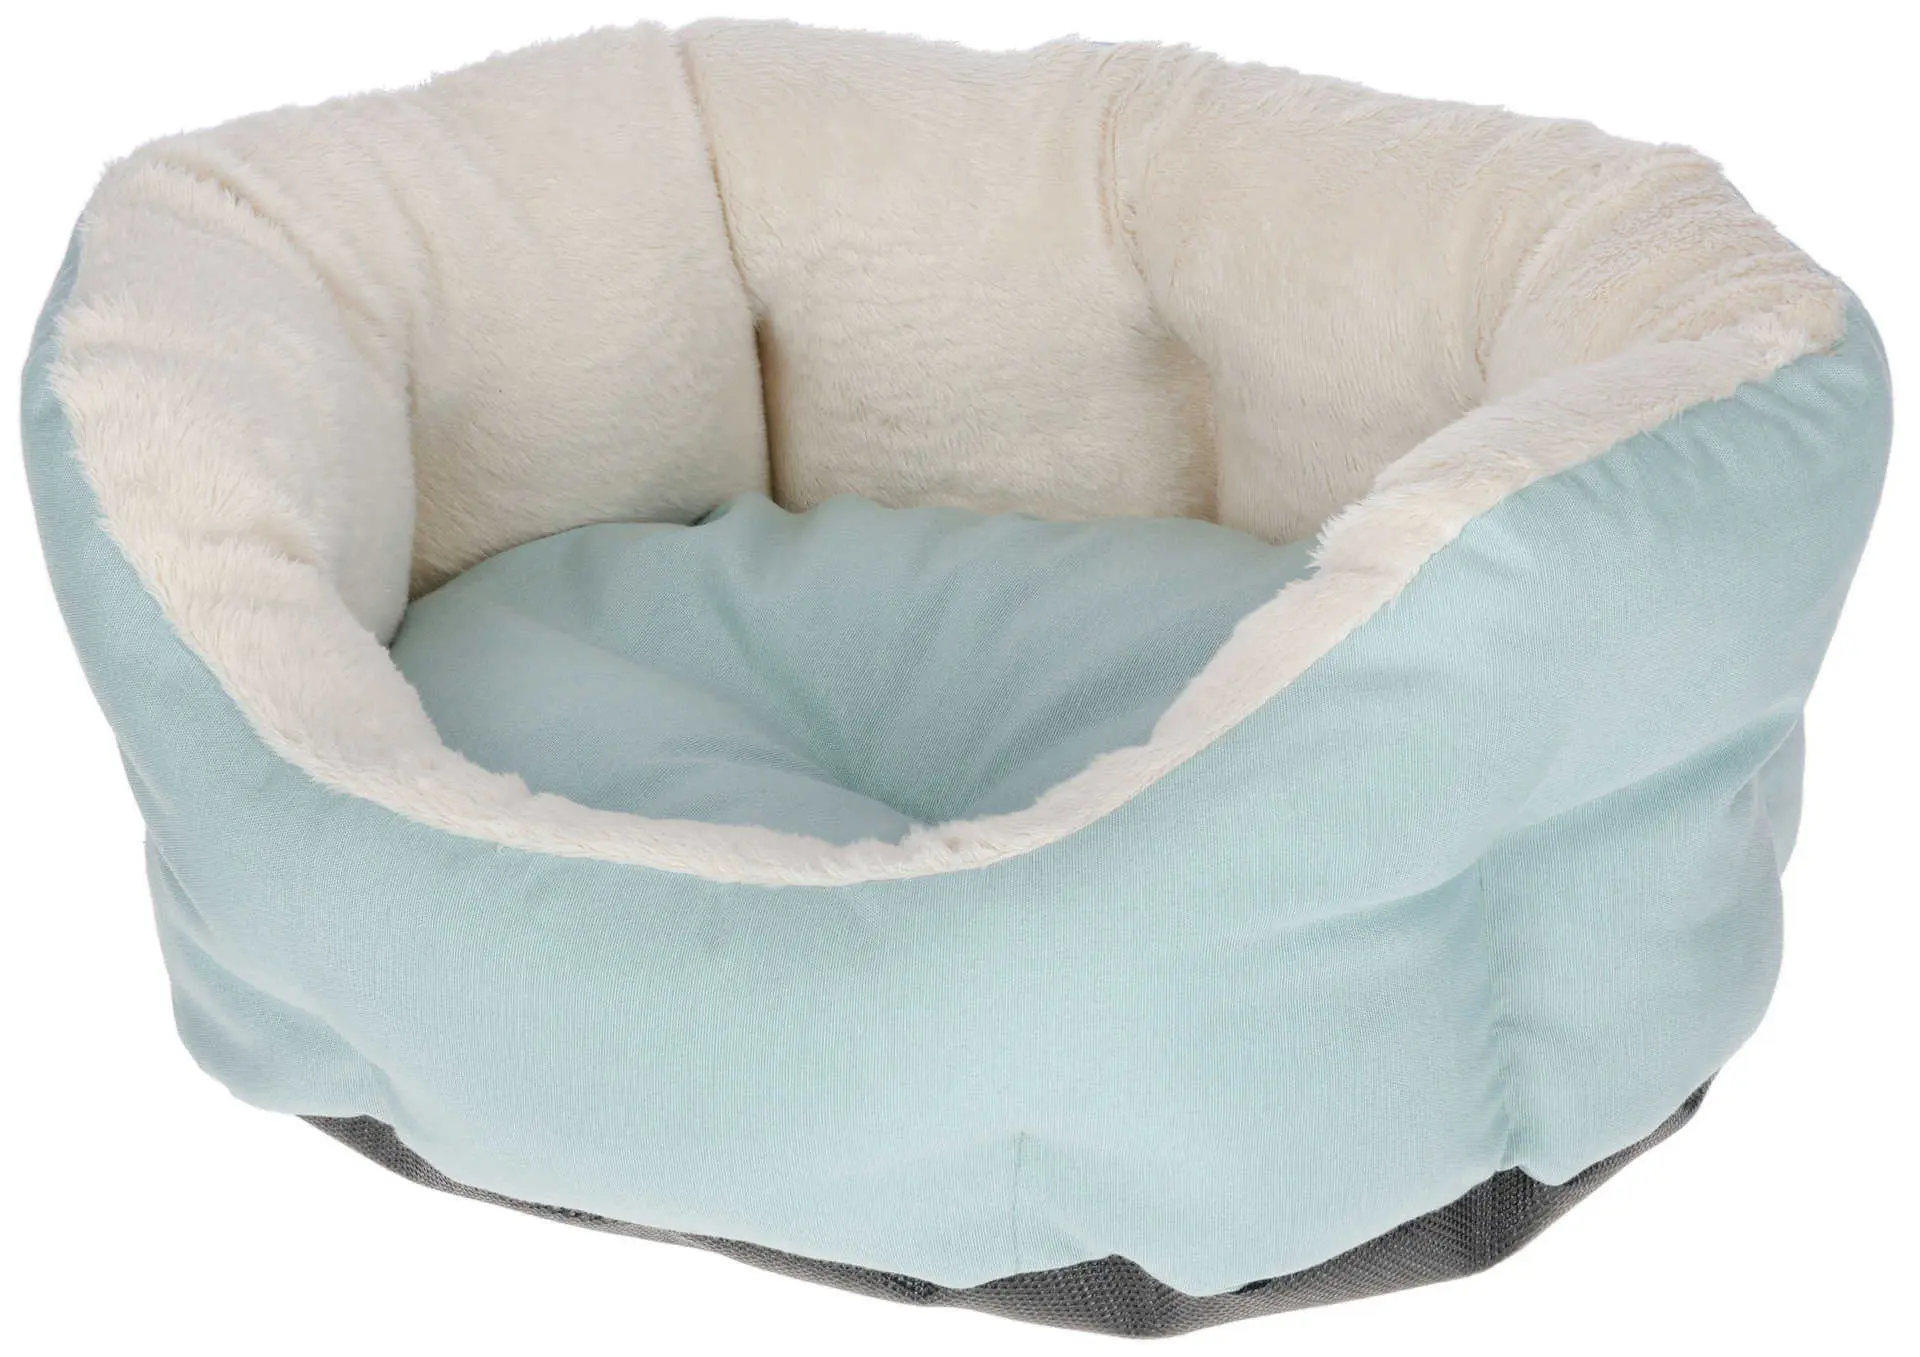 Puppy Bed, turquoise, 45 x 40 x 20 cm